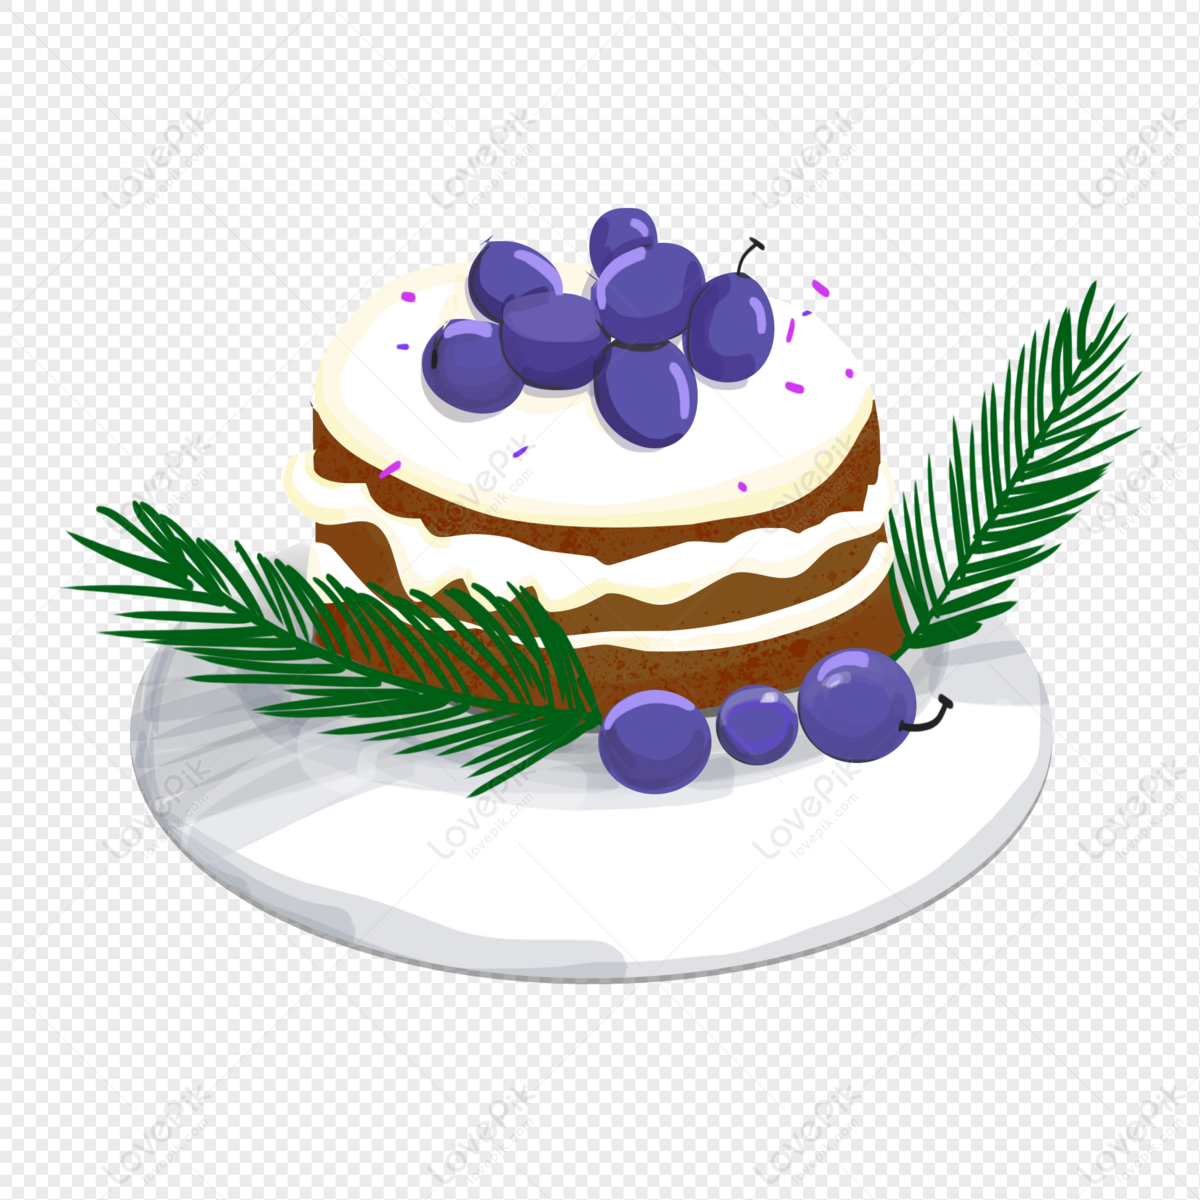 Happy Birthday Cake Vector Illustration, Chocolate, Party, Vanilla PNG Free  Download And Clipart Image For Free Download - Lovepik | 450136023